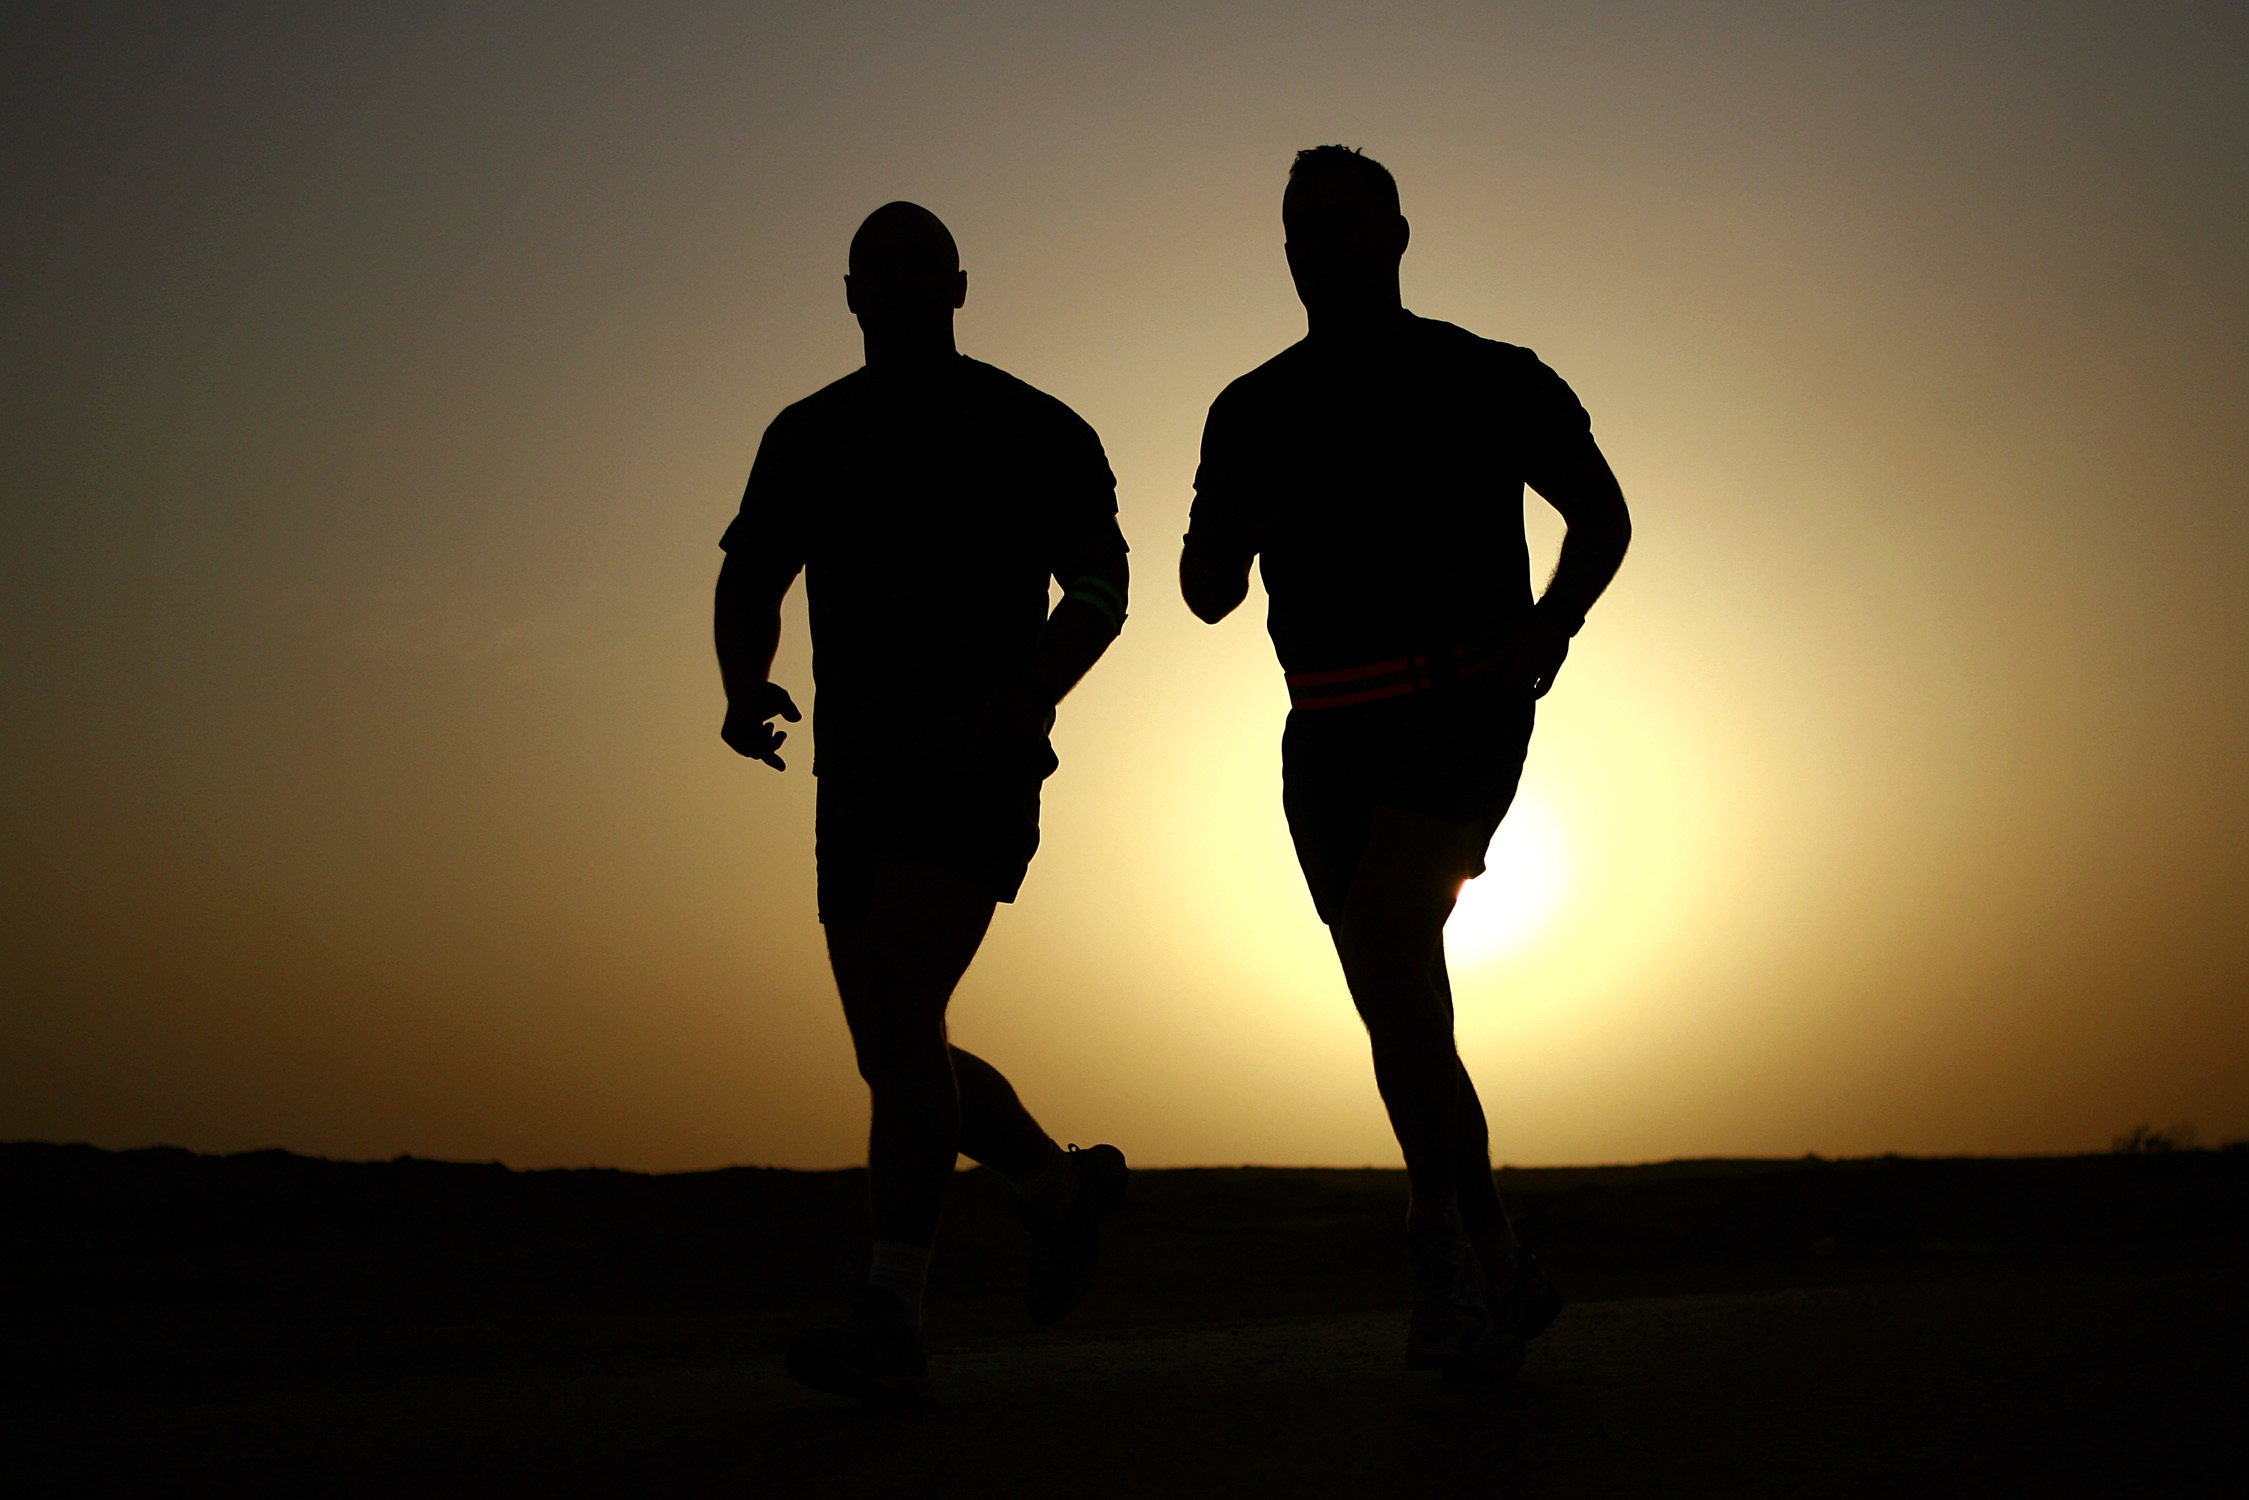 runners-silhouettes-athletes-fitness-39308